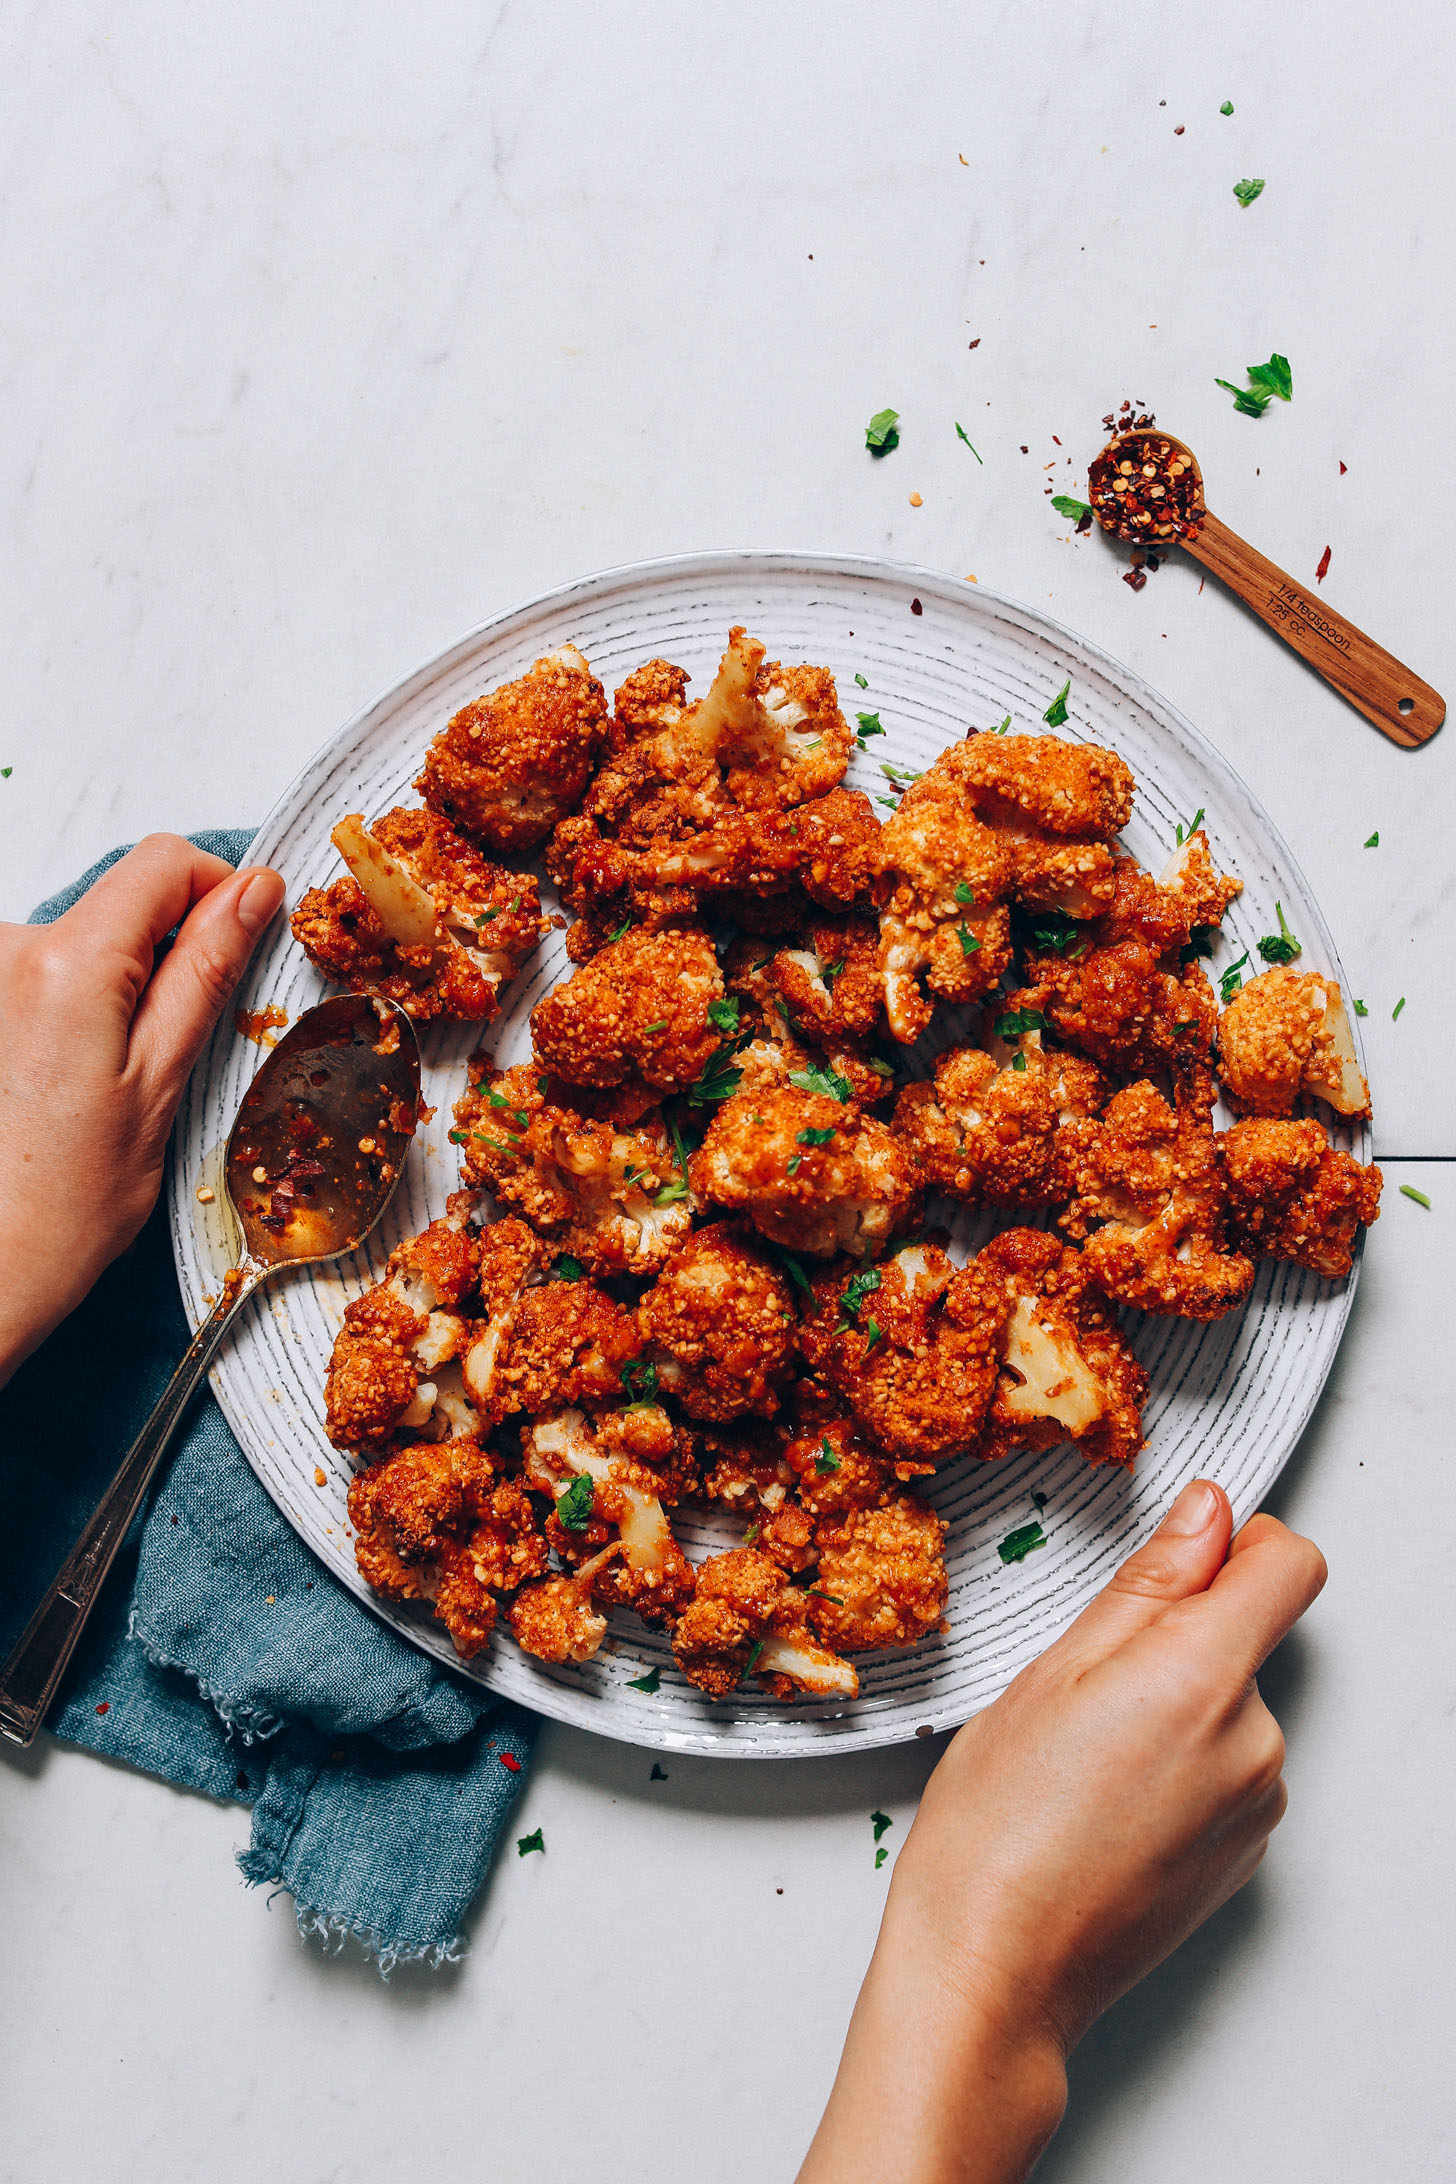 Holding the sides of a plate of Crispy Breaded Cauliflower